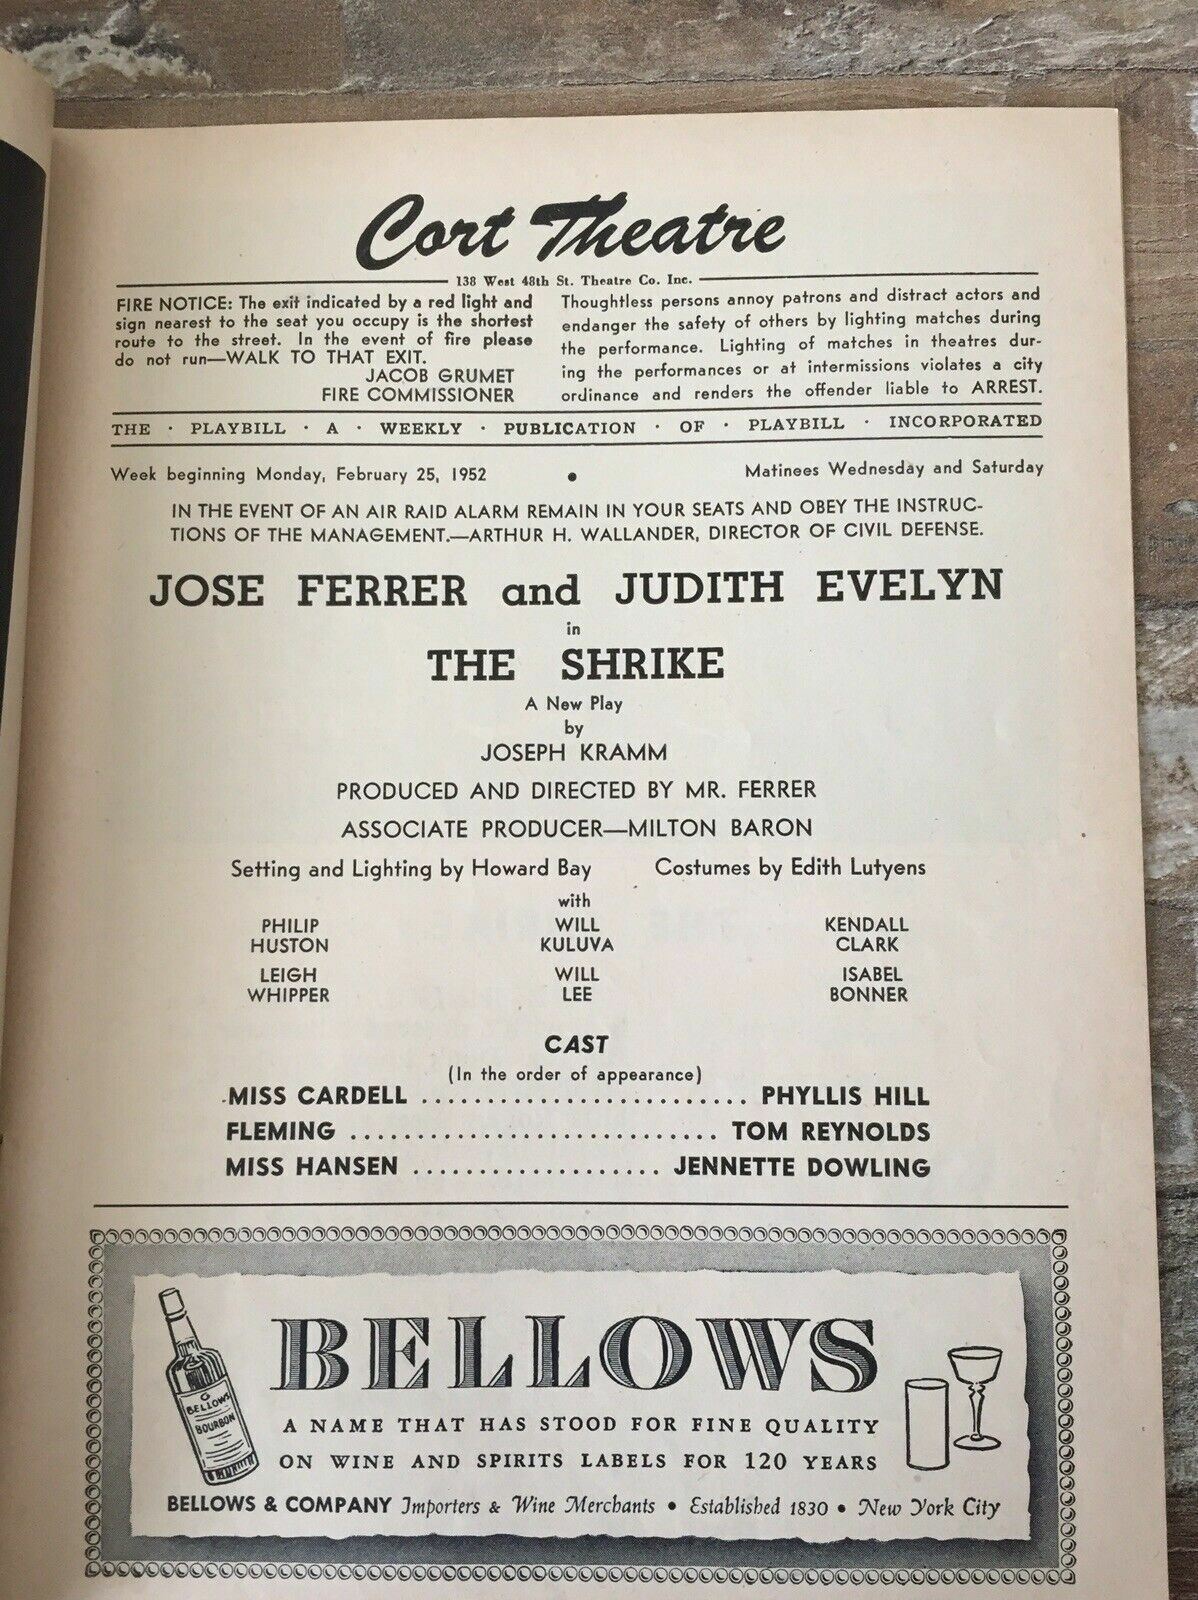 LOT OF SIX VINTAGE EARLY 1950'S PLAYBILL - VERY GOOD CONDITION - MANY RARE Без бренда - фотография #10